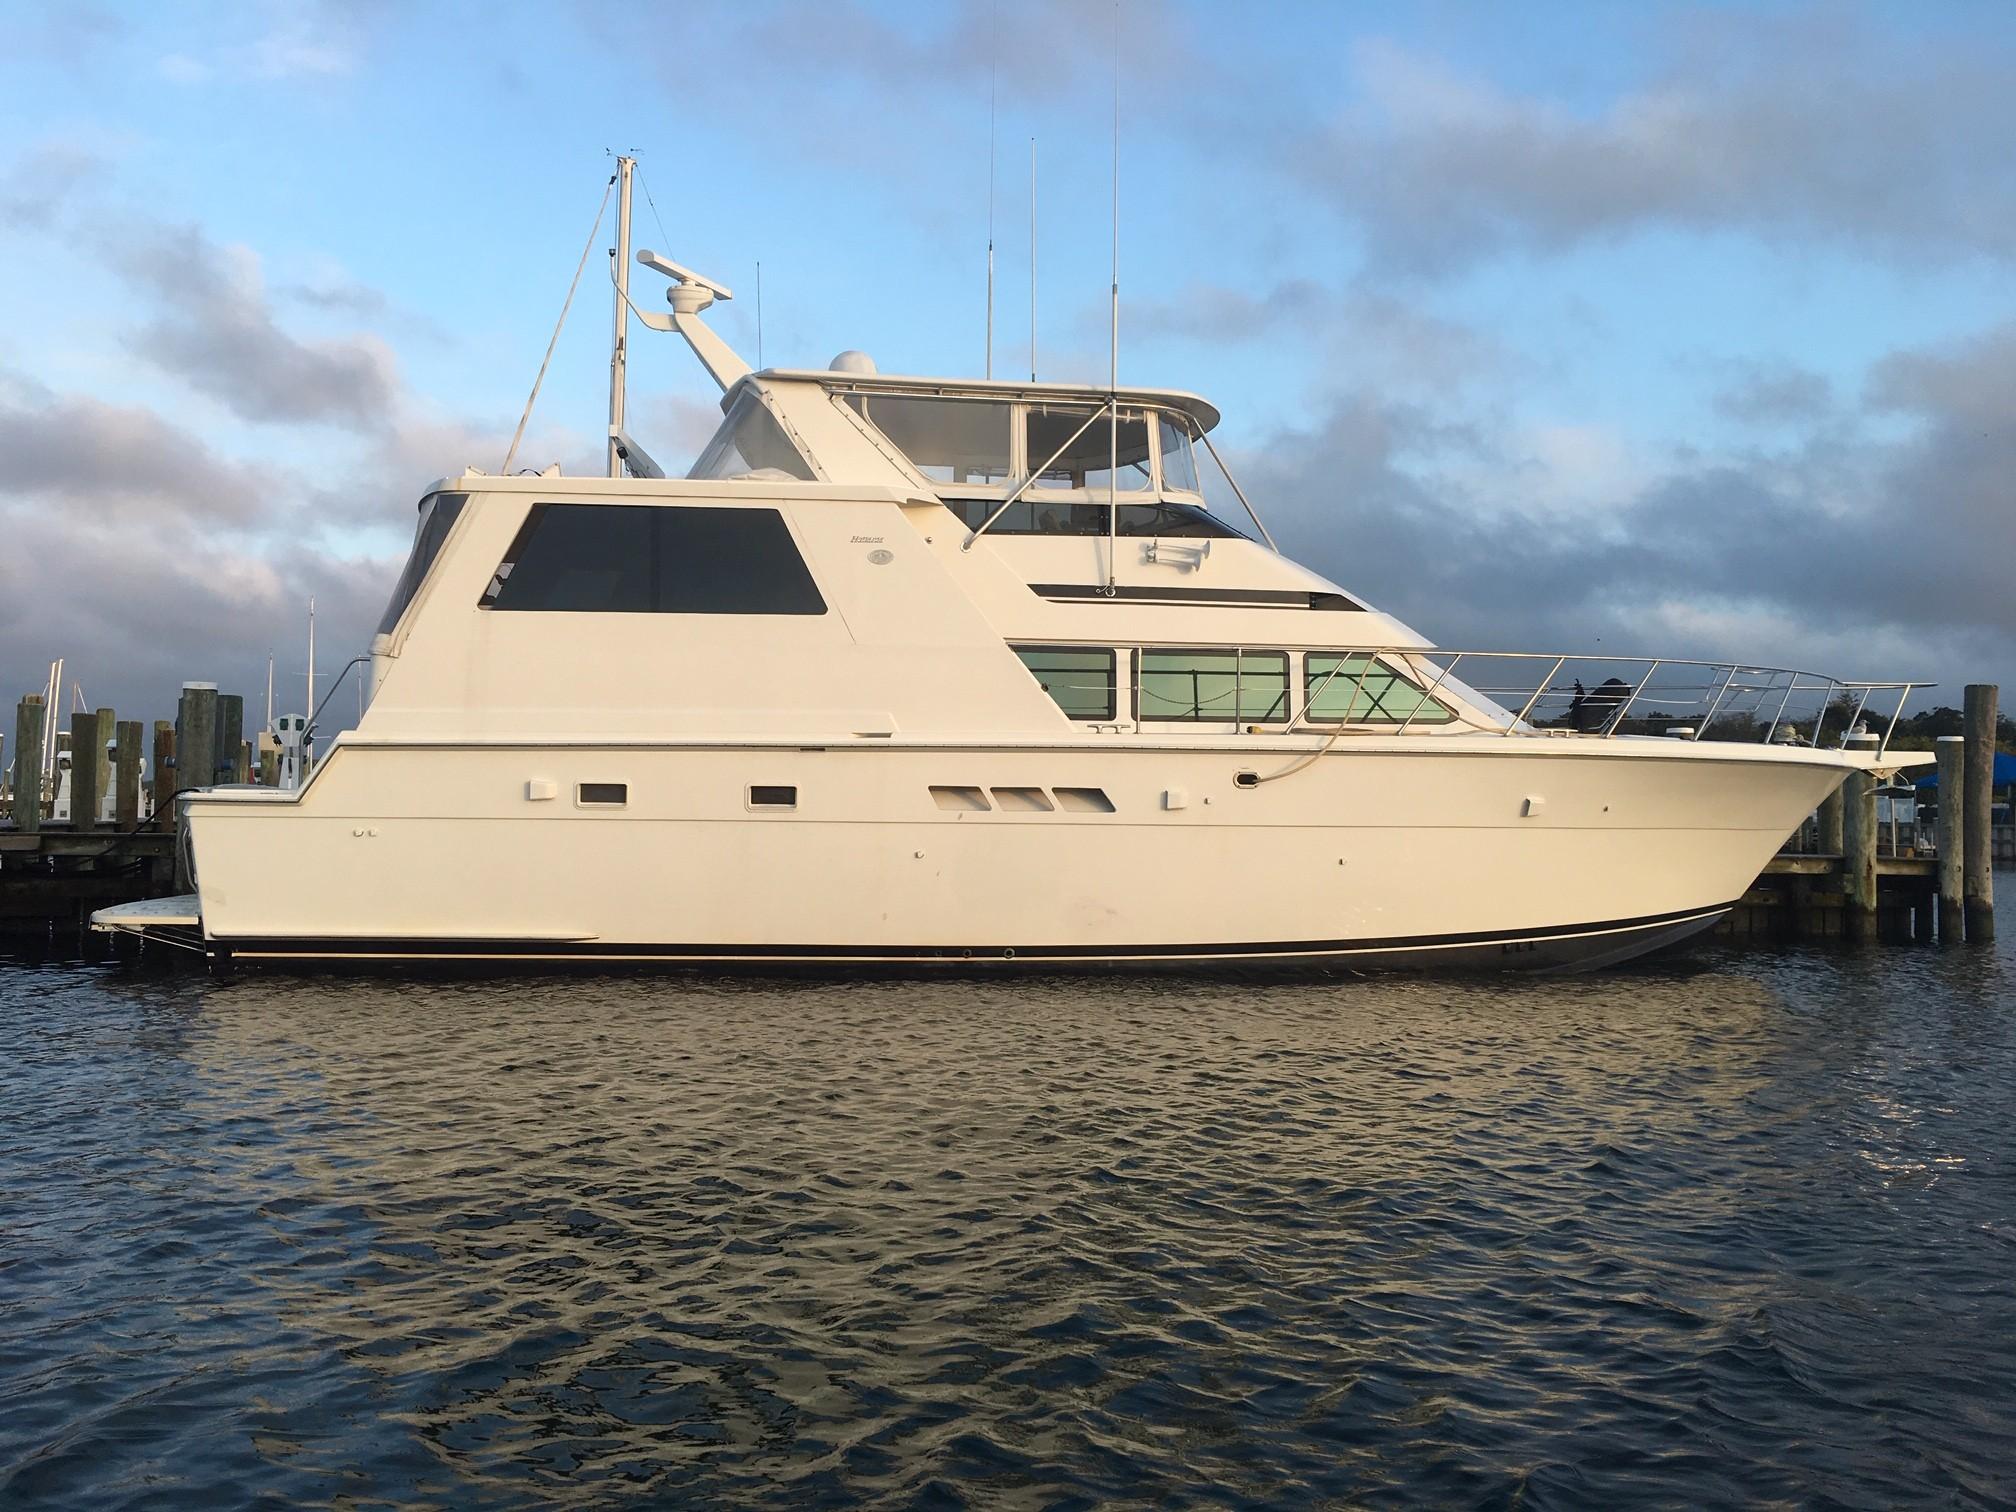 52 ft cruiser yacht for sale